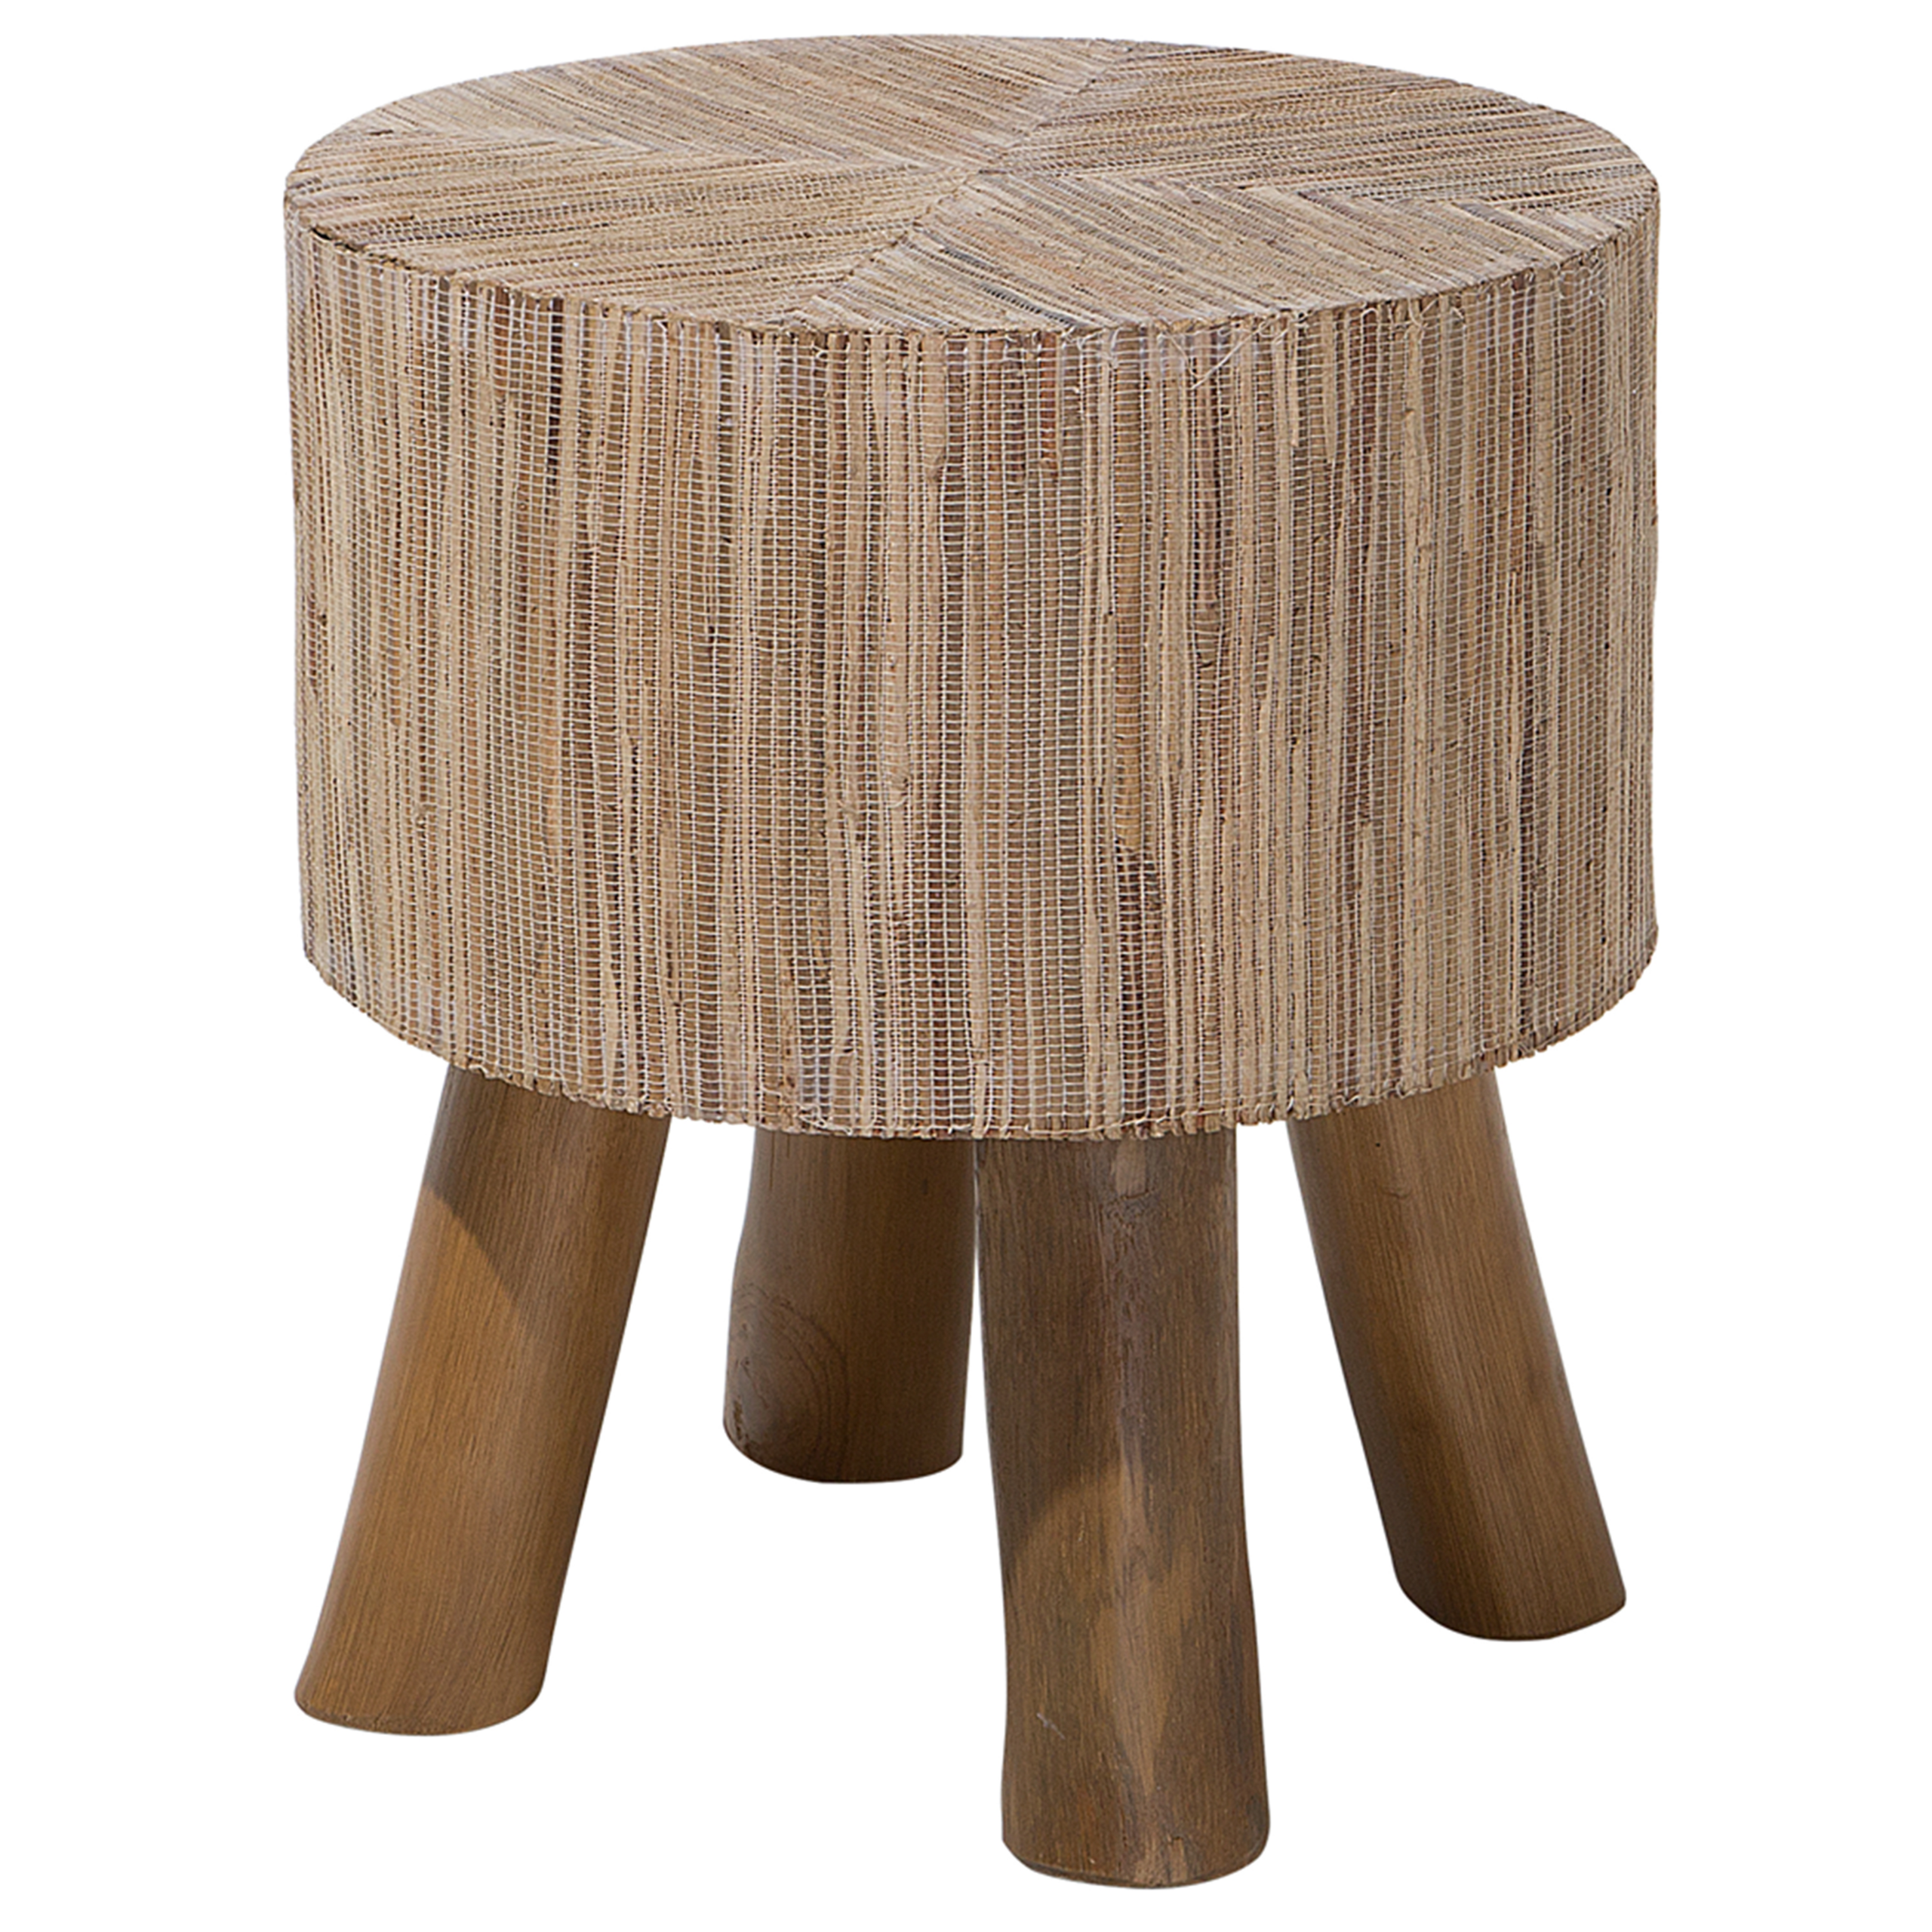 Beliani Side Table Light Wood Teak with Water Hyacinth Top 35 cm Round Footstool Rustic Raw Style